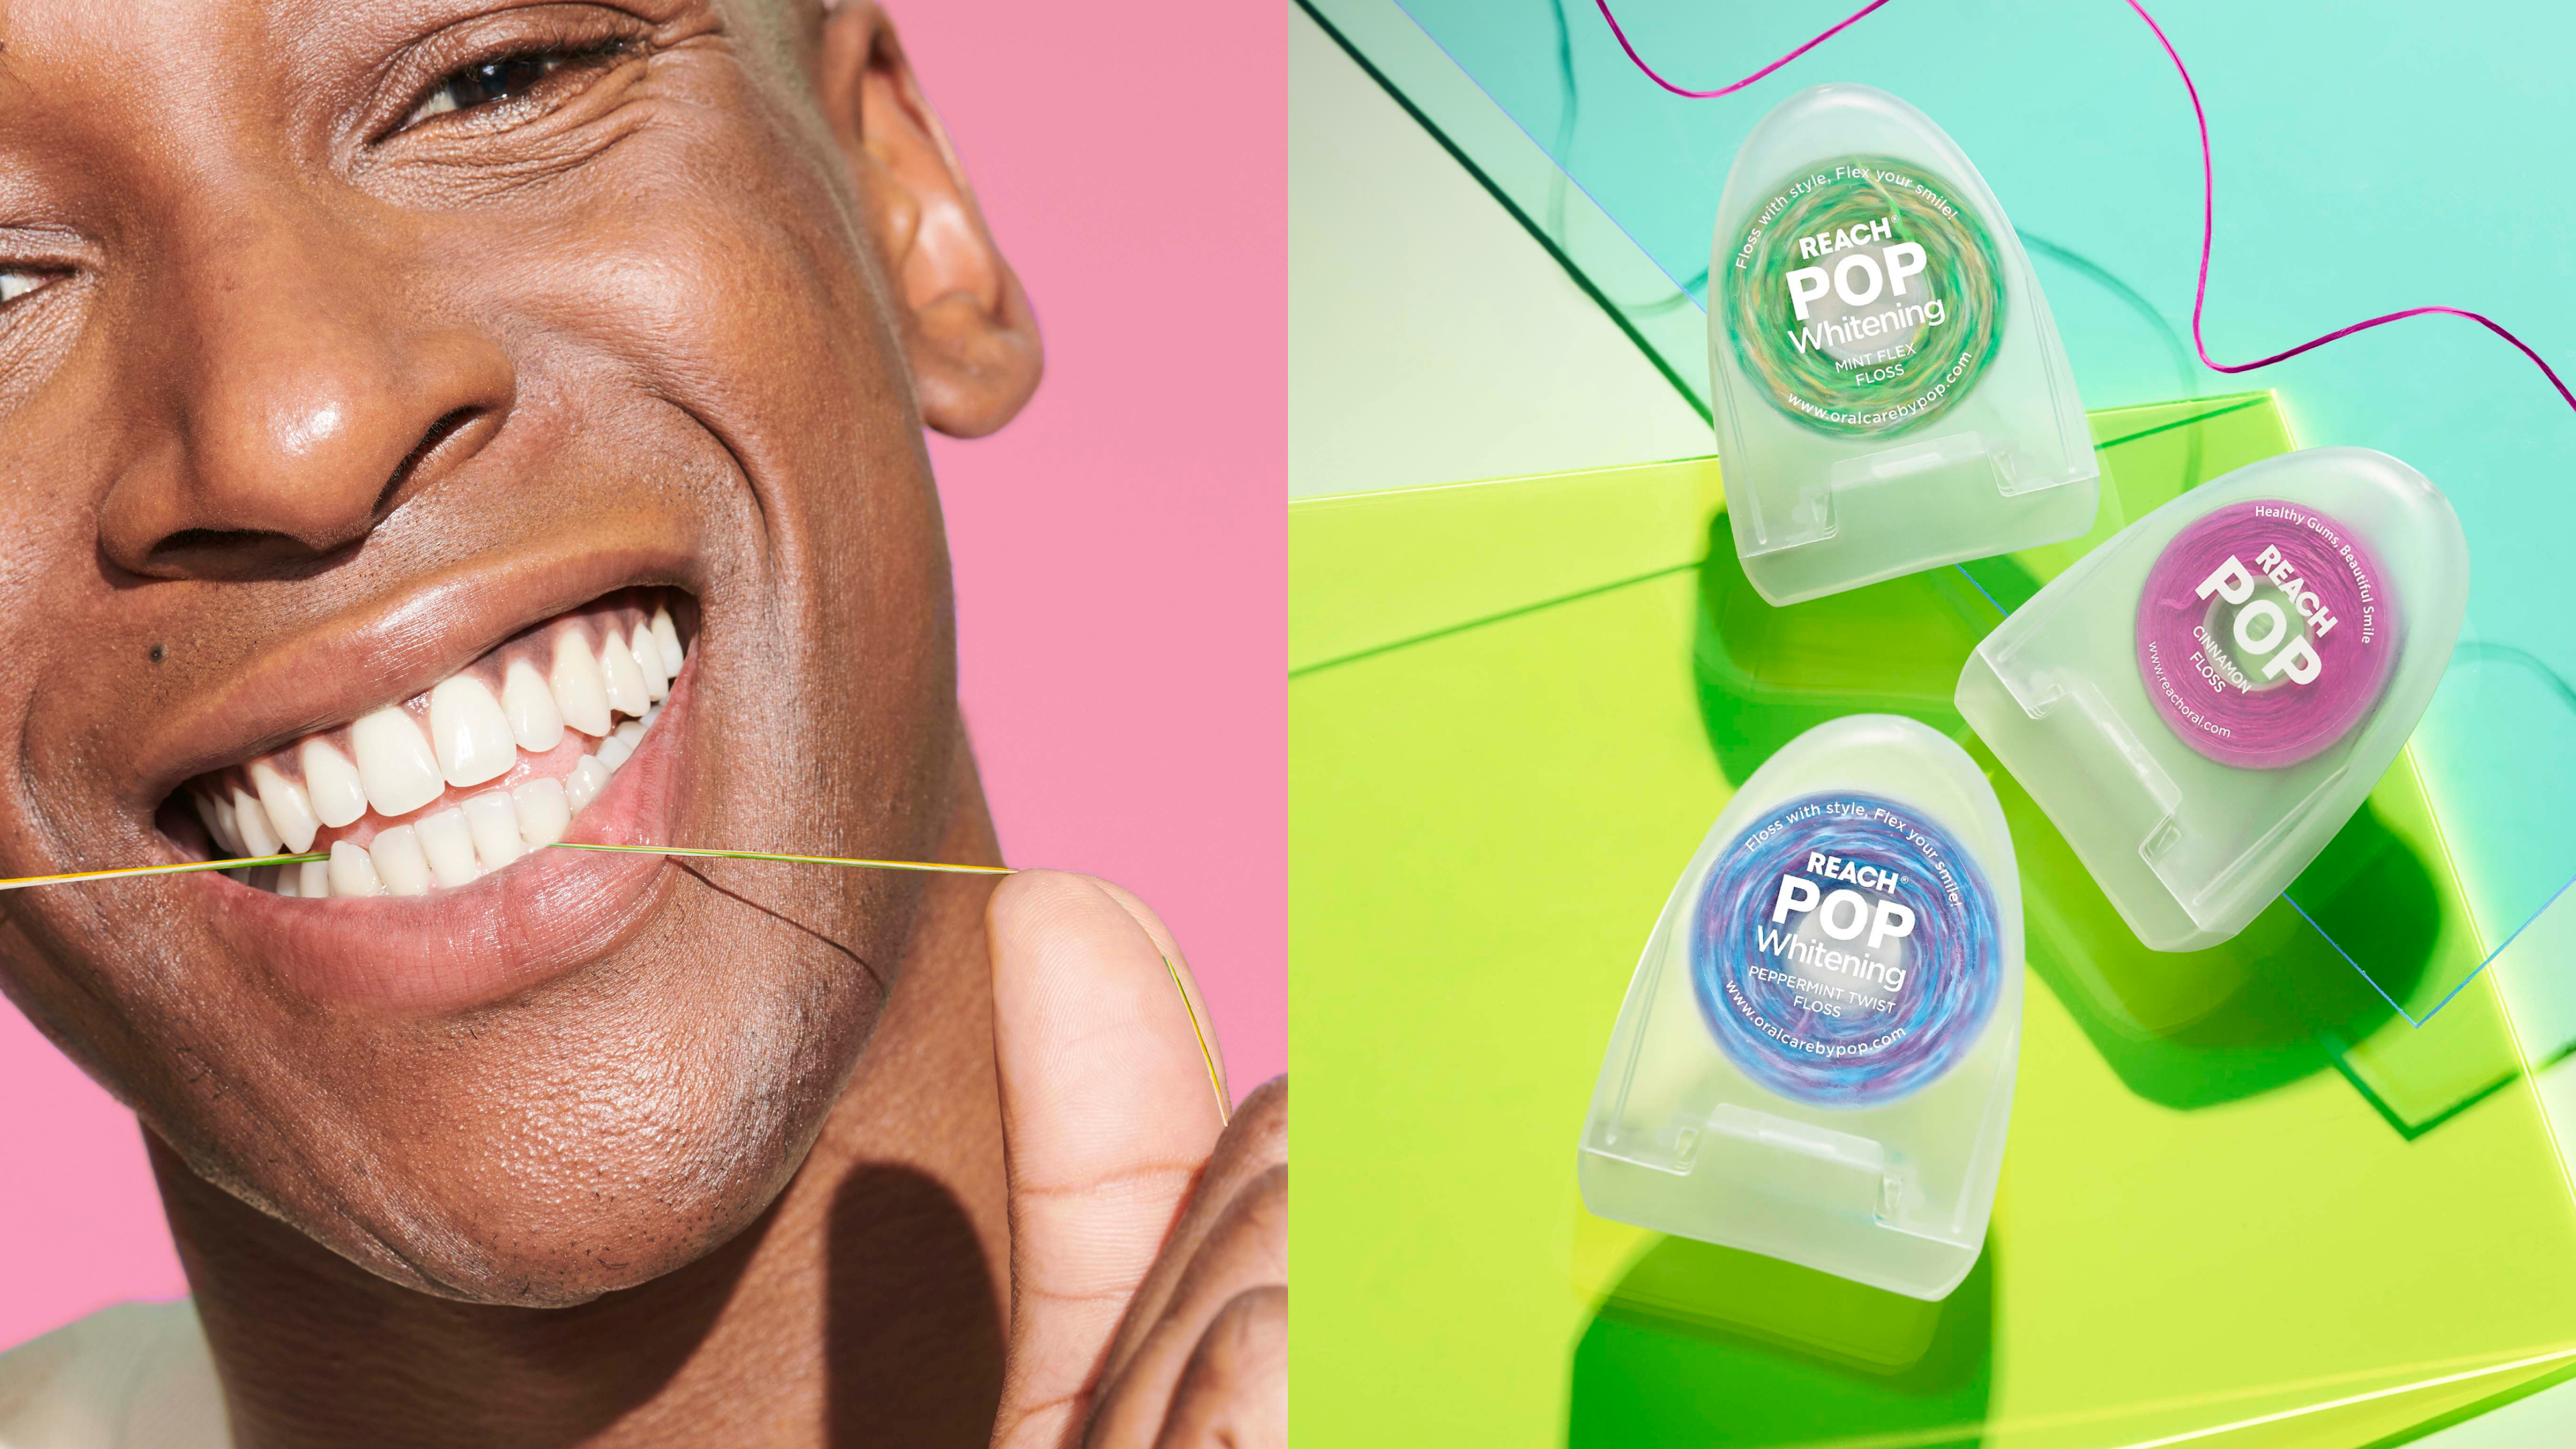 On the left part of the image a man is smiling, looking at the viewer, using the Reach POP Floss, and on the right part of the image there are three boxes of different Reach Pop Floss